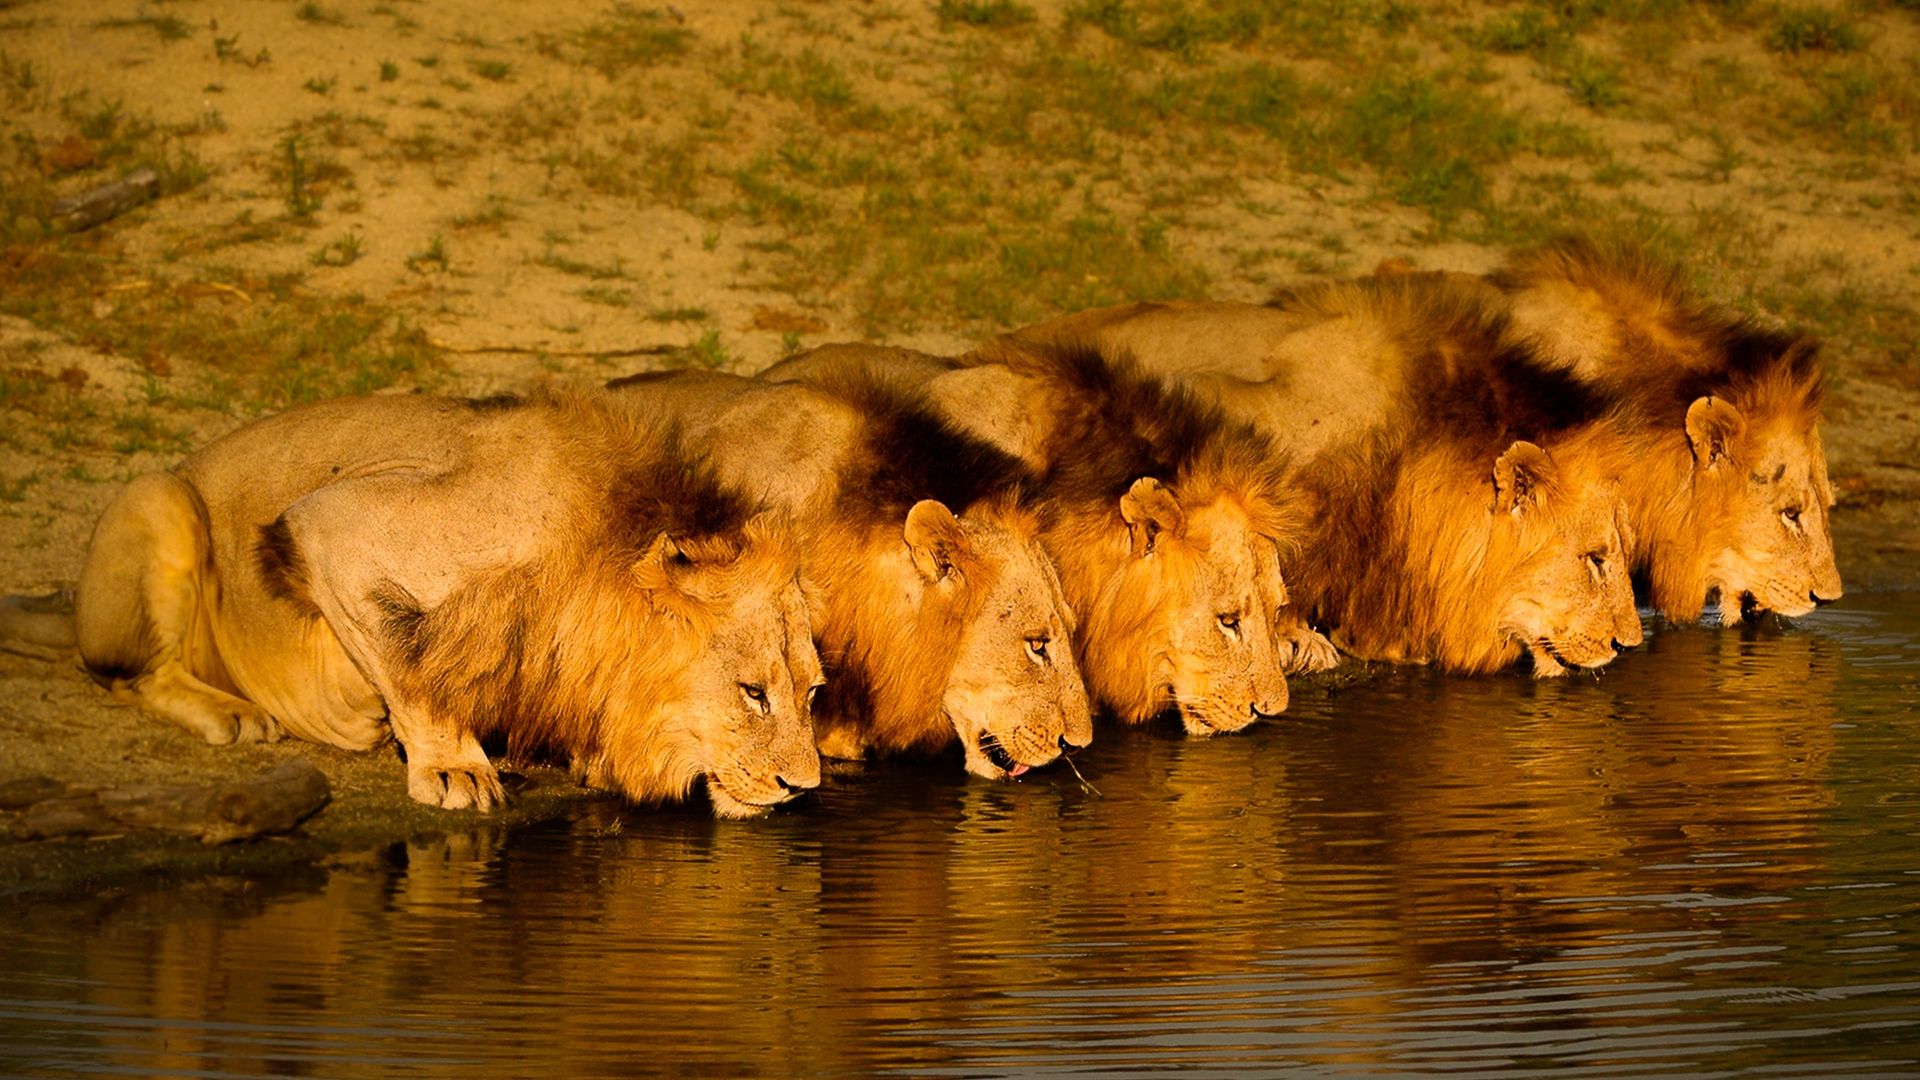 Brothers in Blood: The Lions of Sabi Sand background